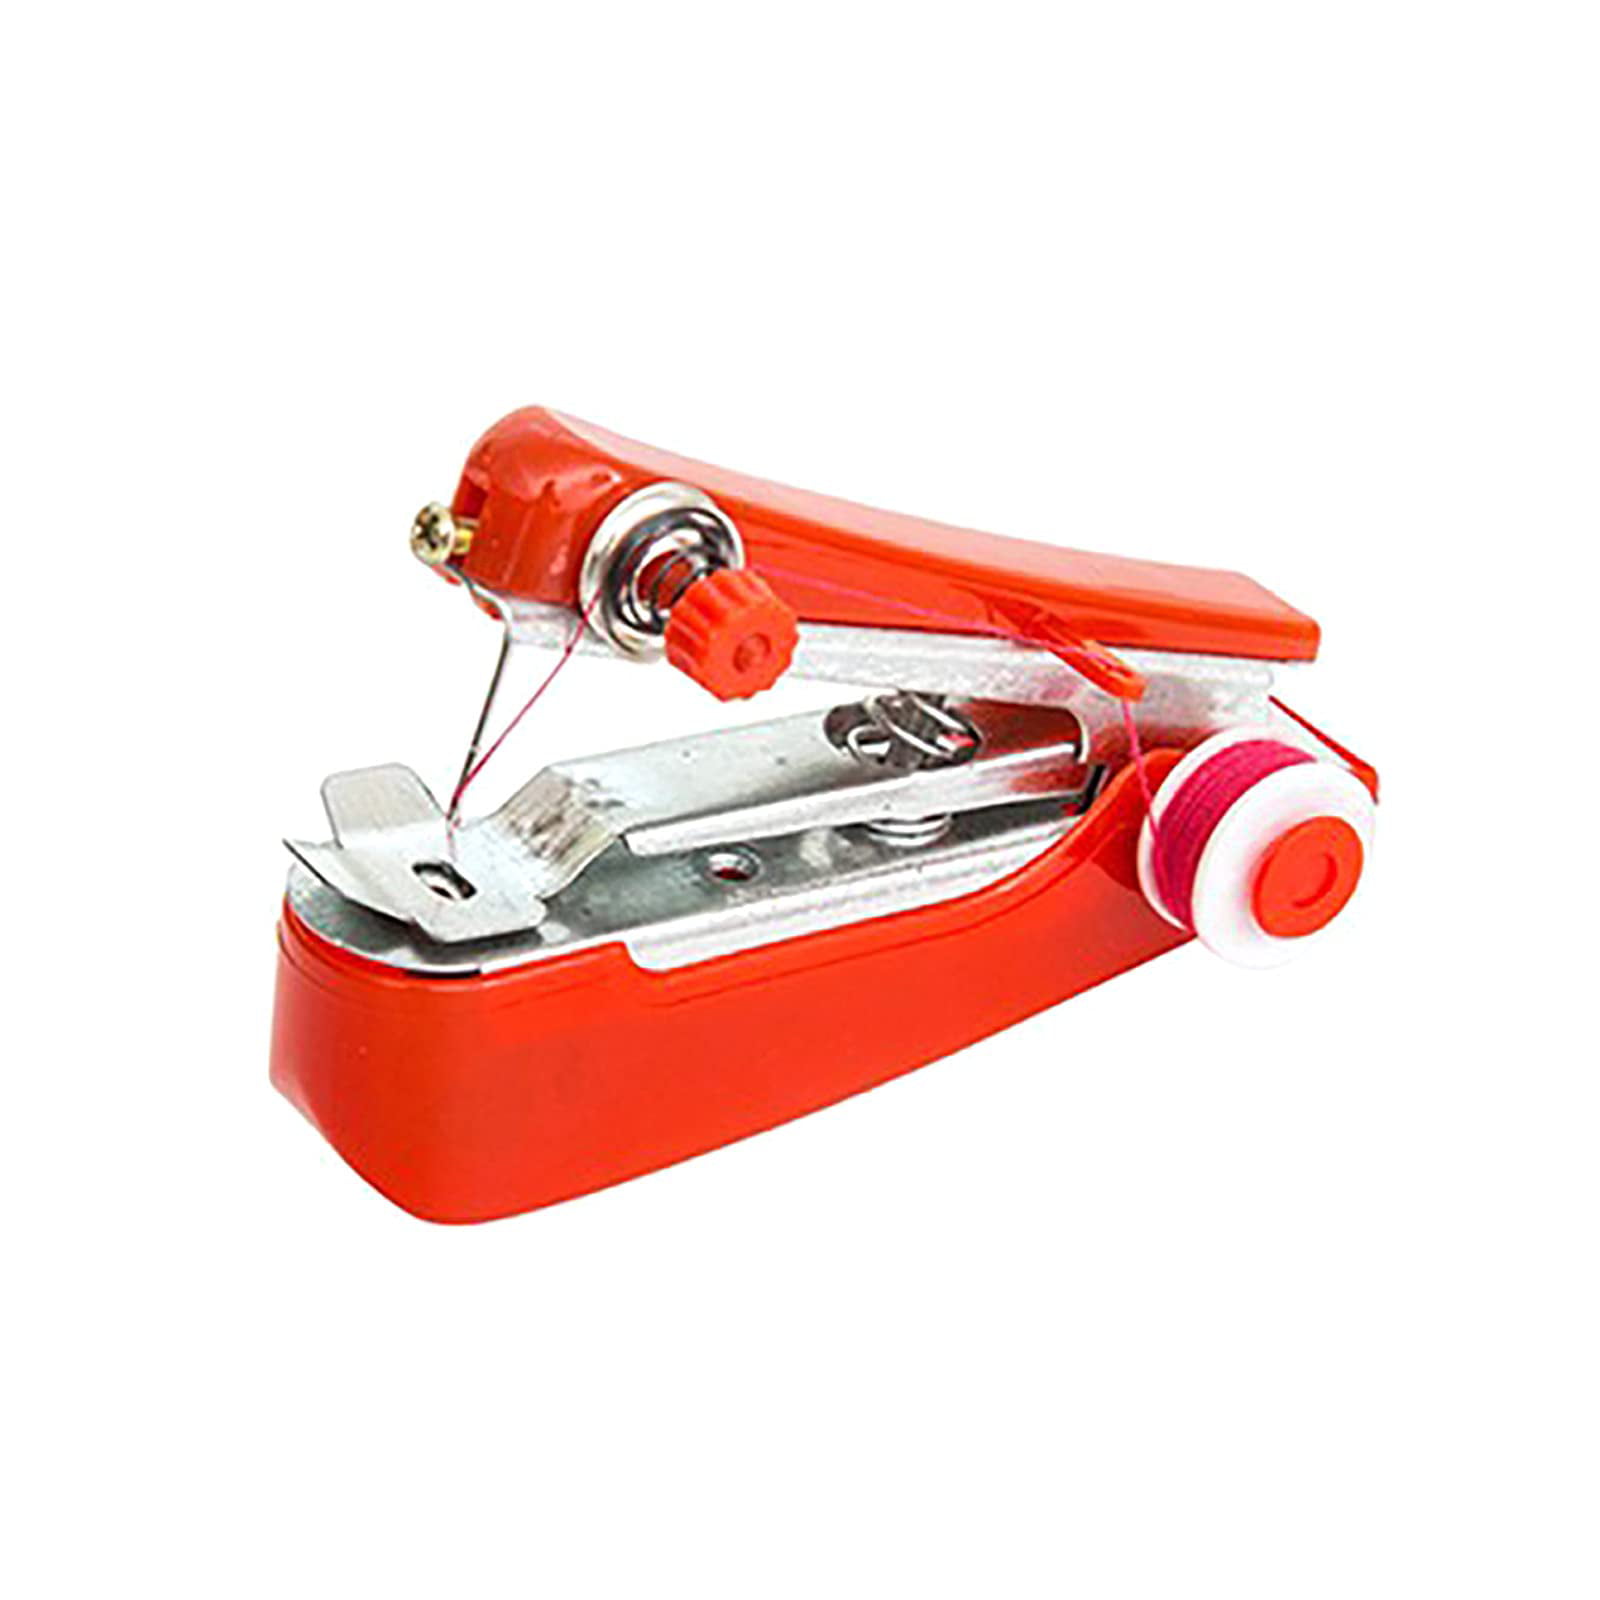  Handy Sewer - Handysewer Portable Sewing Machine, The Handy  Sewer, Mini Sewer Handheld Sewing Machine, Portable Mini Manual Sewing  Machine Handy Needlework Tool,Lightweight, Wear-Resistant (Red)